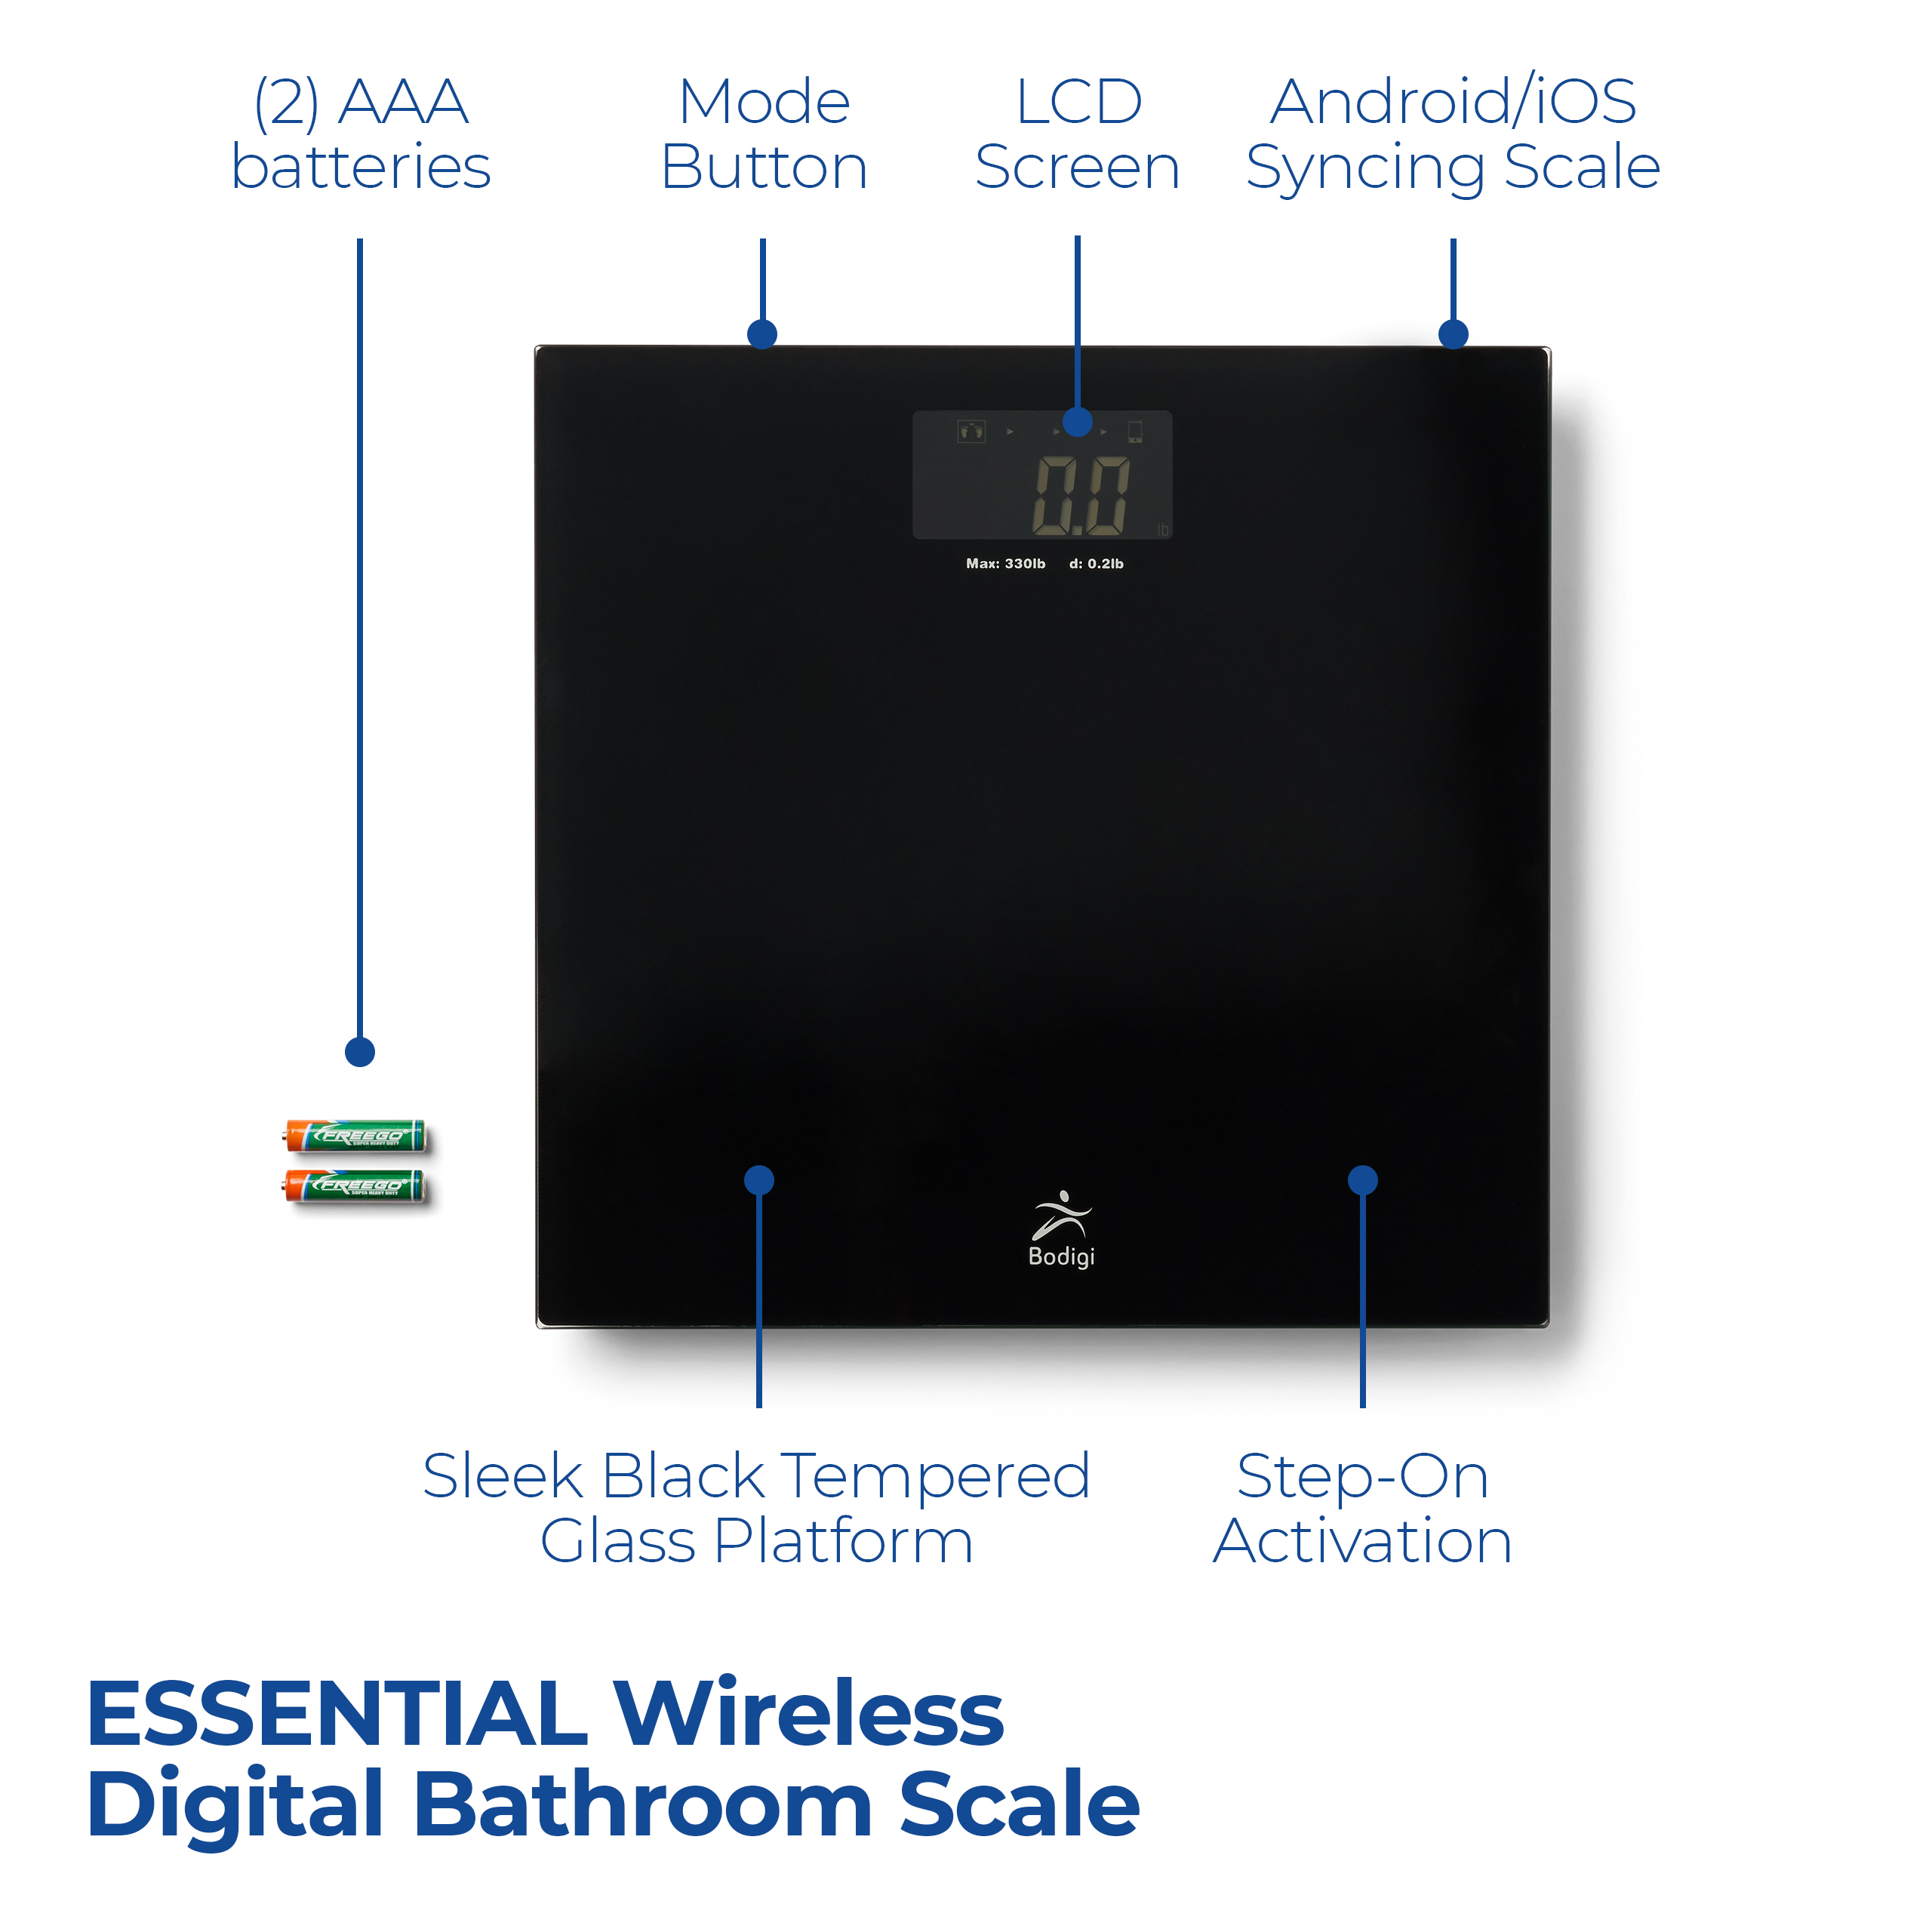 American Weigh Scales - Wireless Bodigi Smart Bathroom Android/IOS Syncing Scale - ESSENTIAL - image 2 of 3